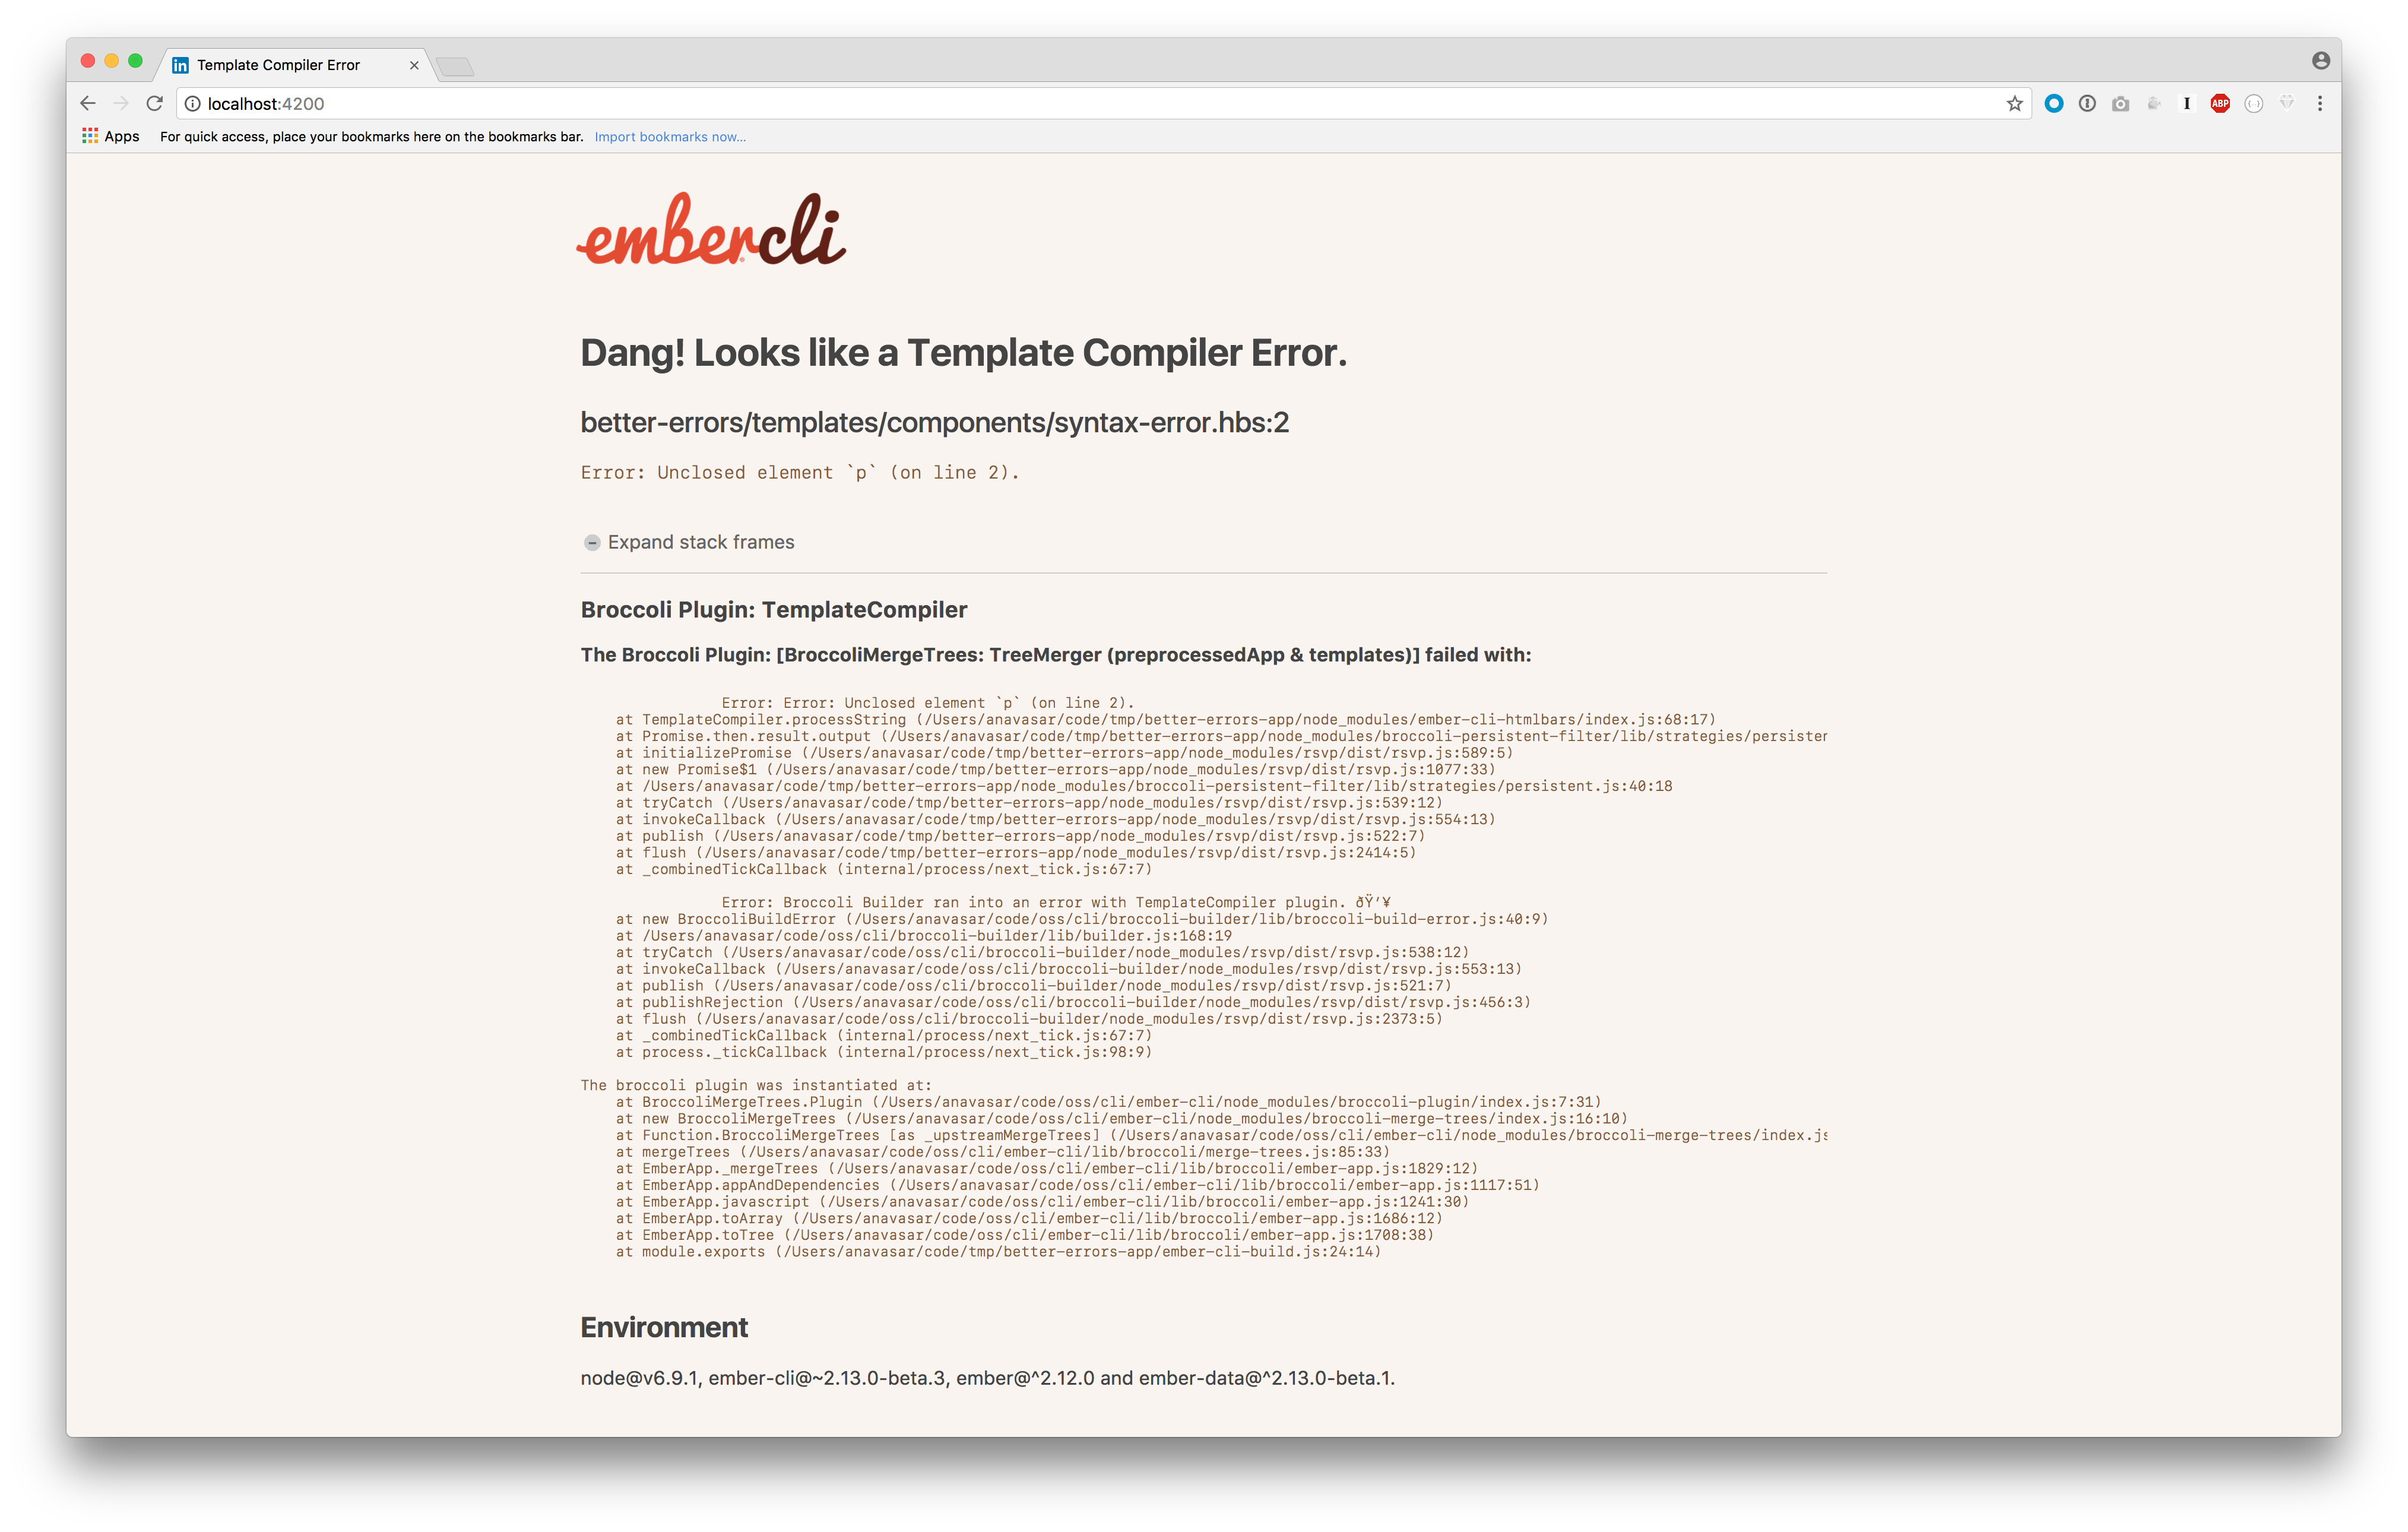 A screenshot of improved error messages in Ember 2.15